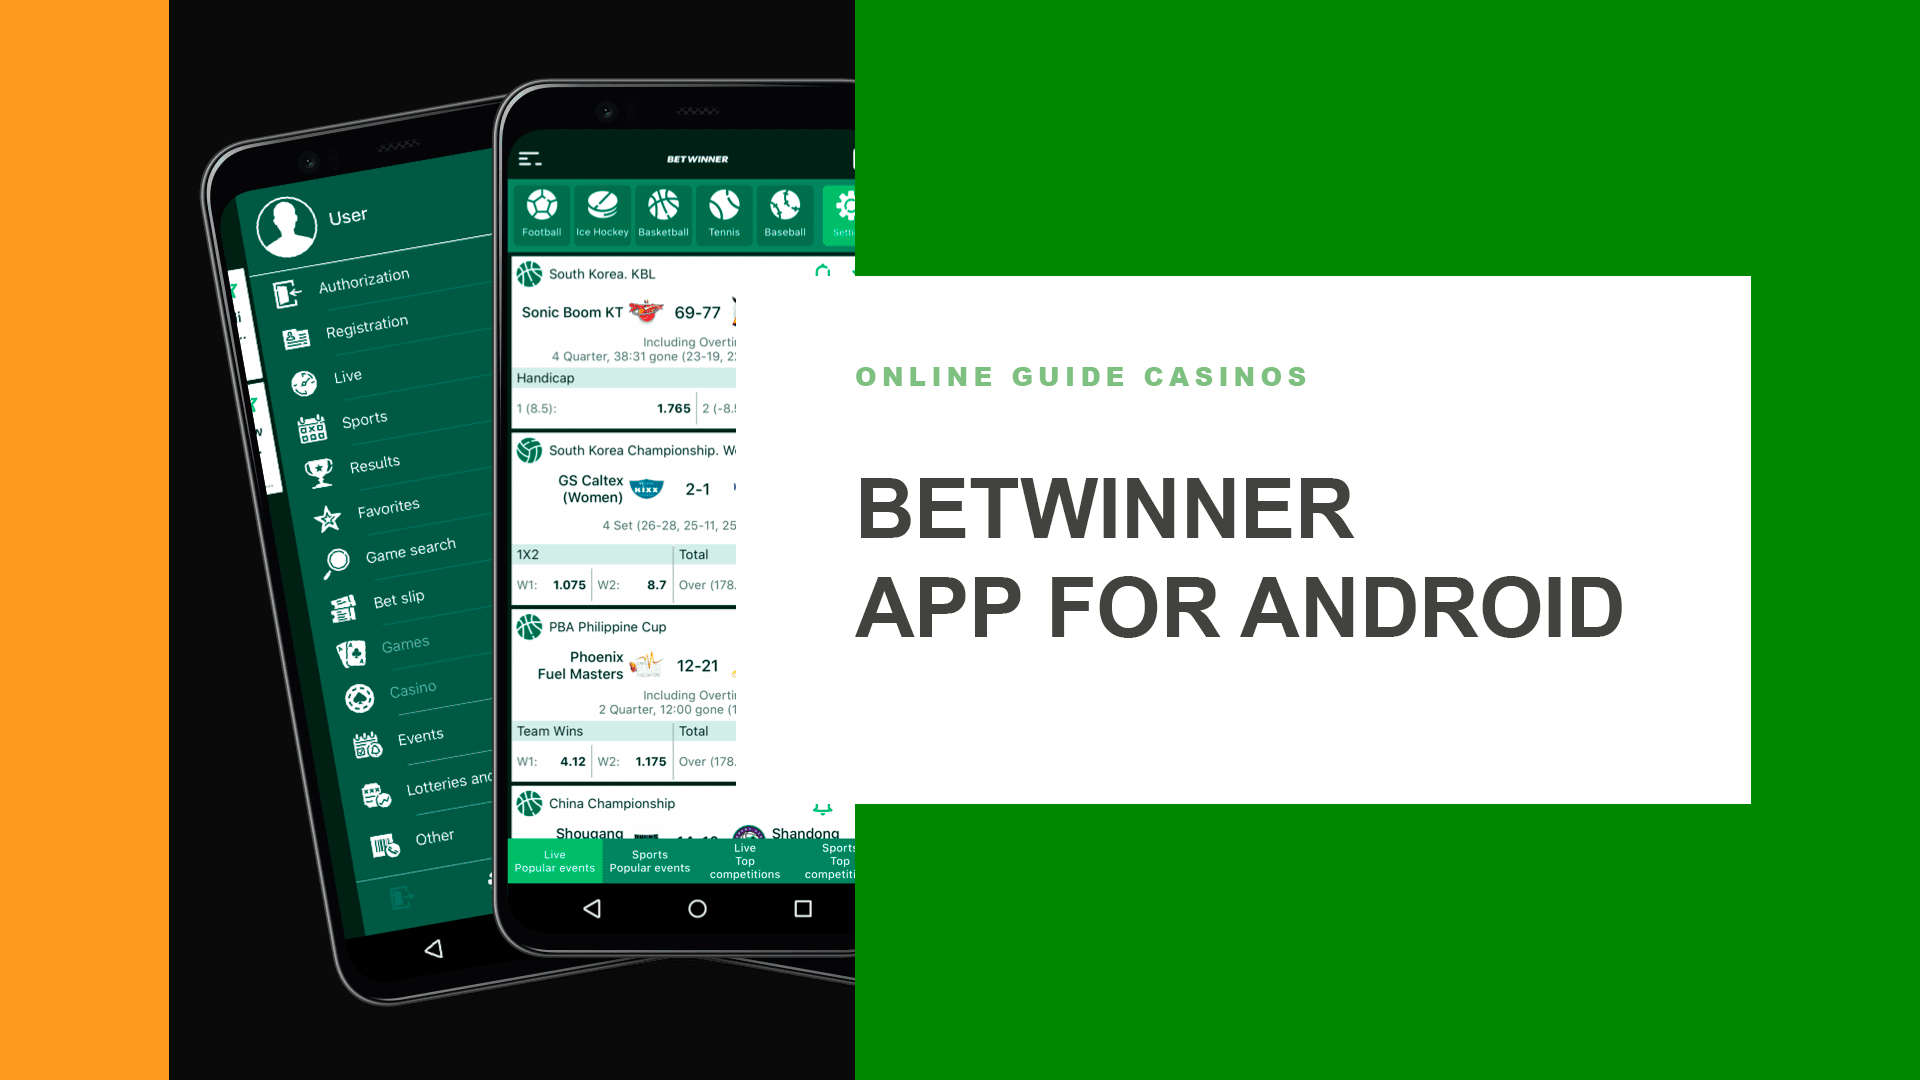 Betwinner App For Android